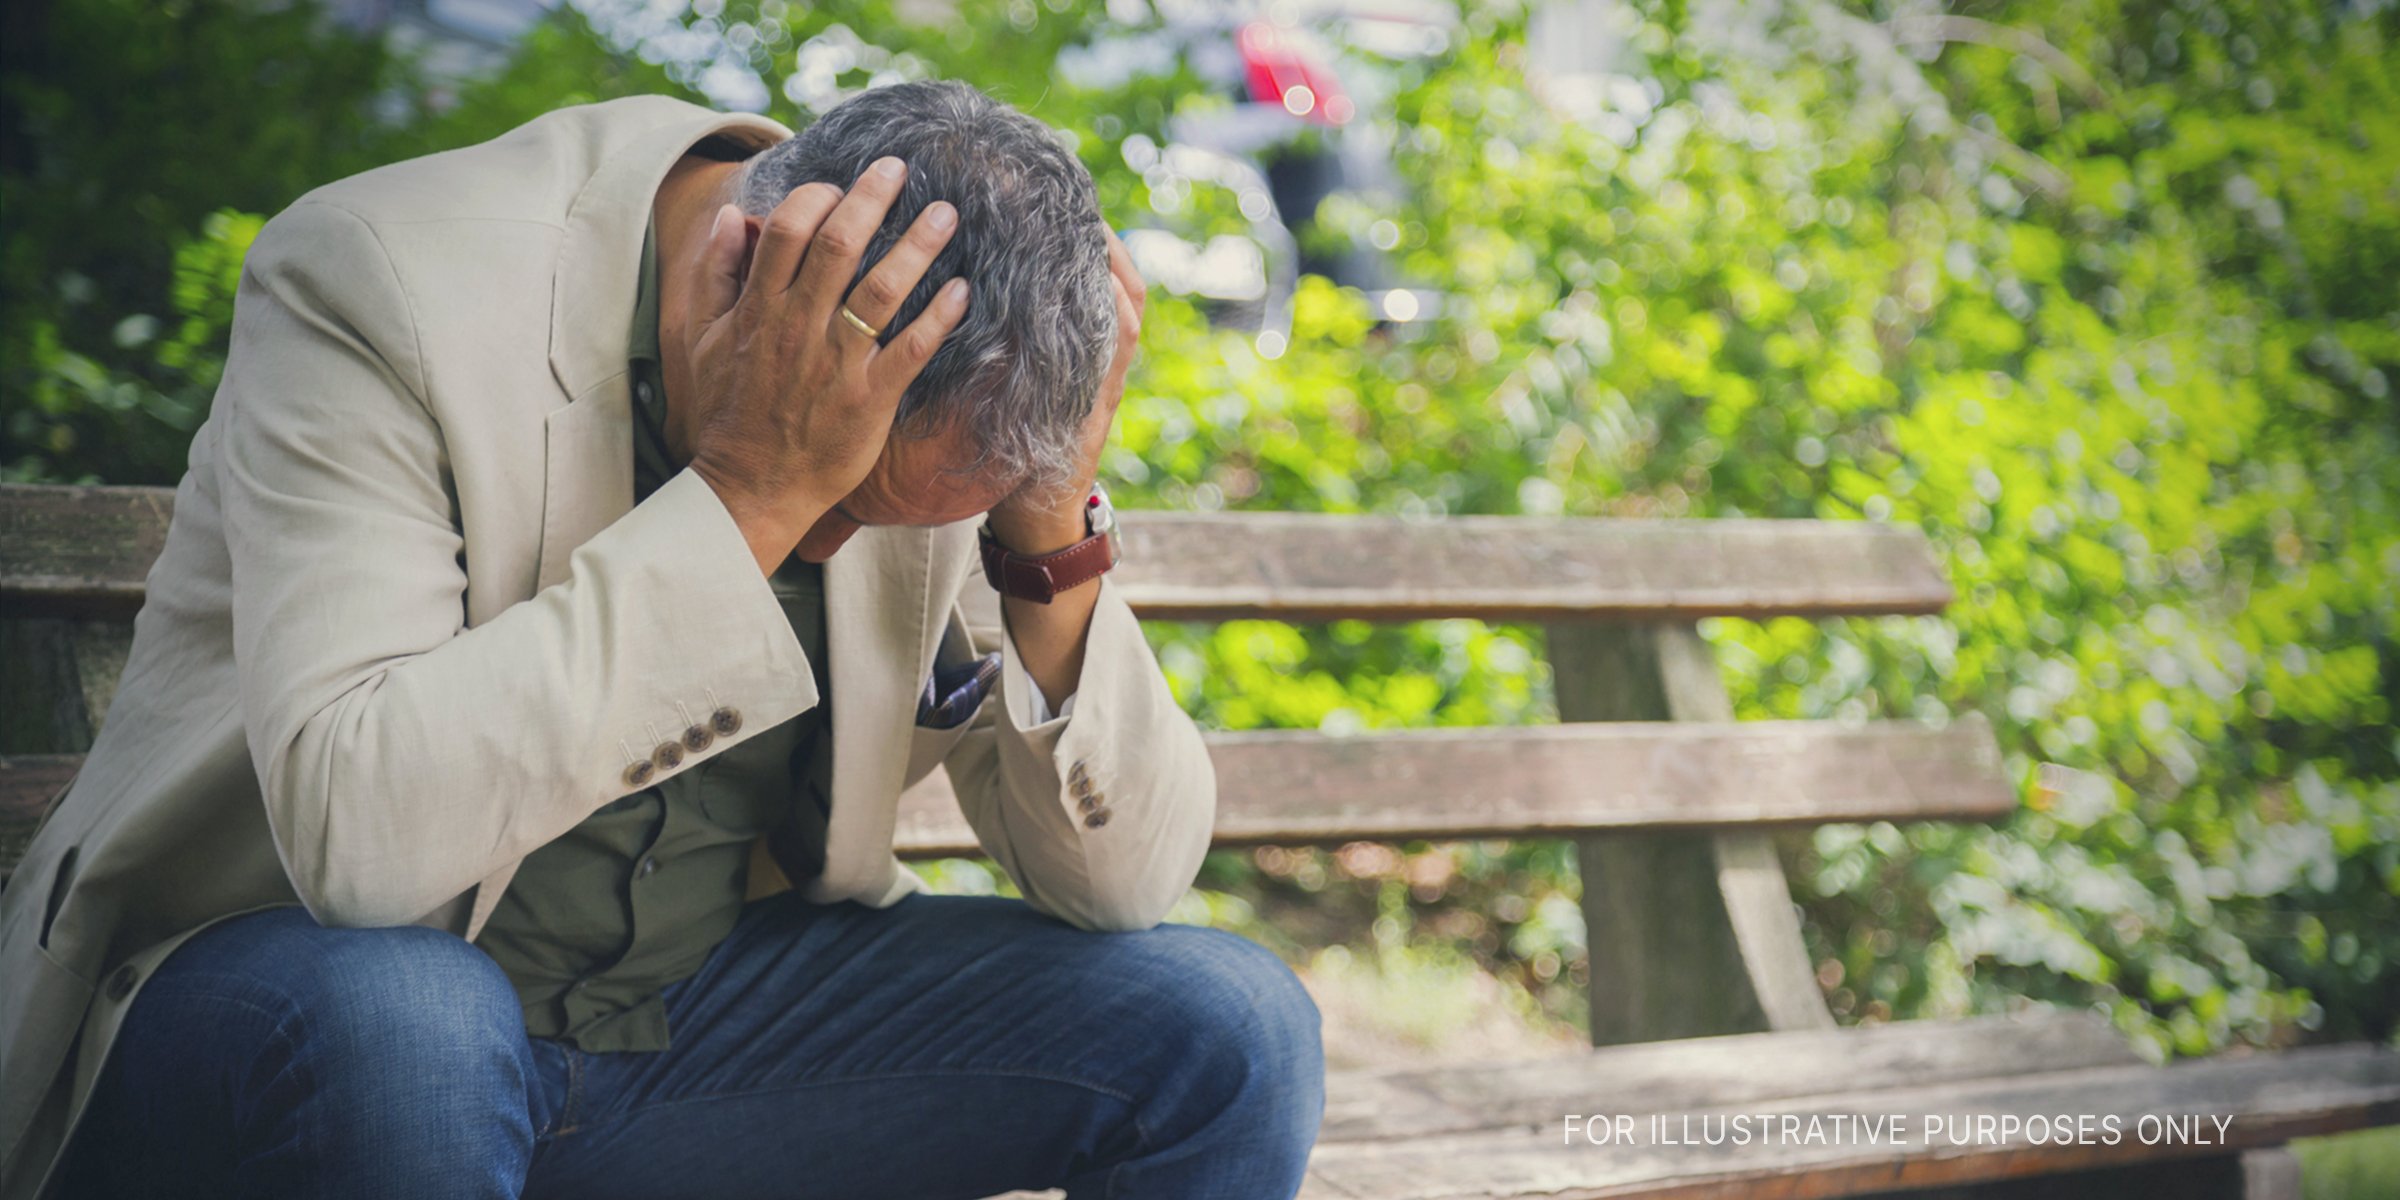 Stressed man sitting on a bench. | Source: Getty Images